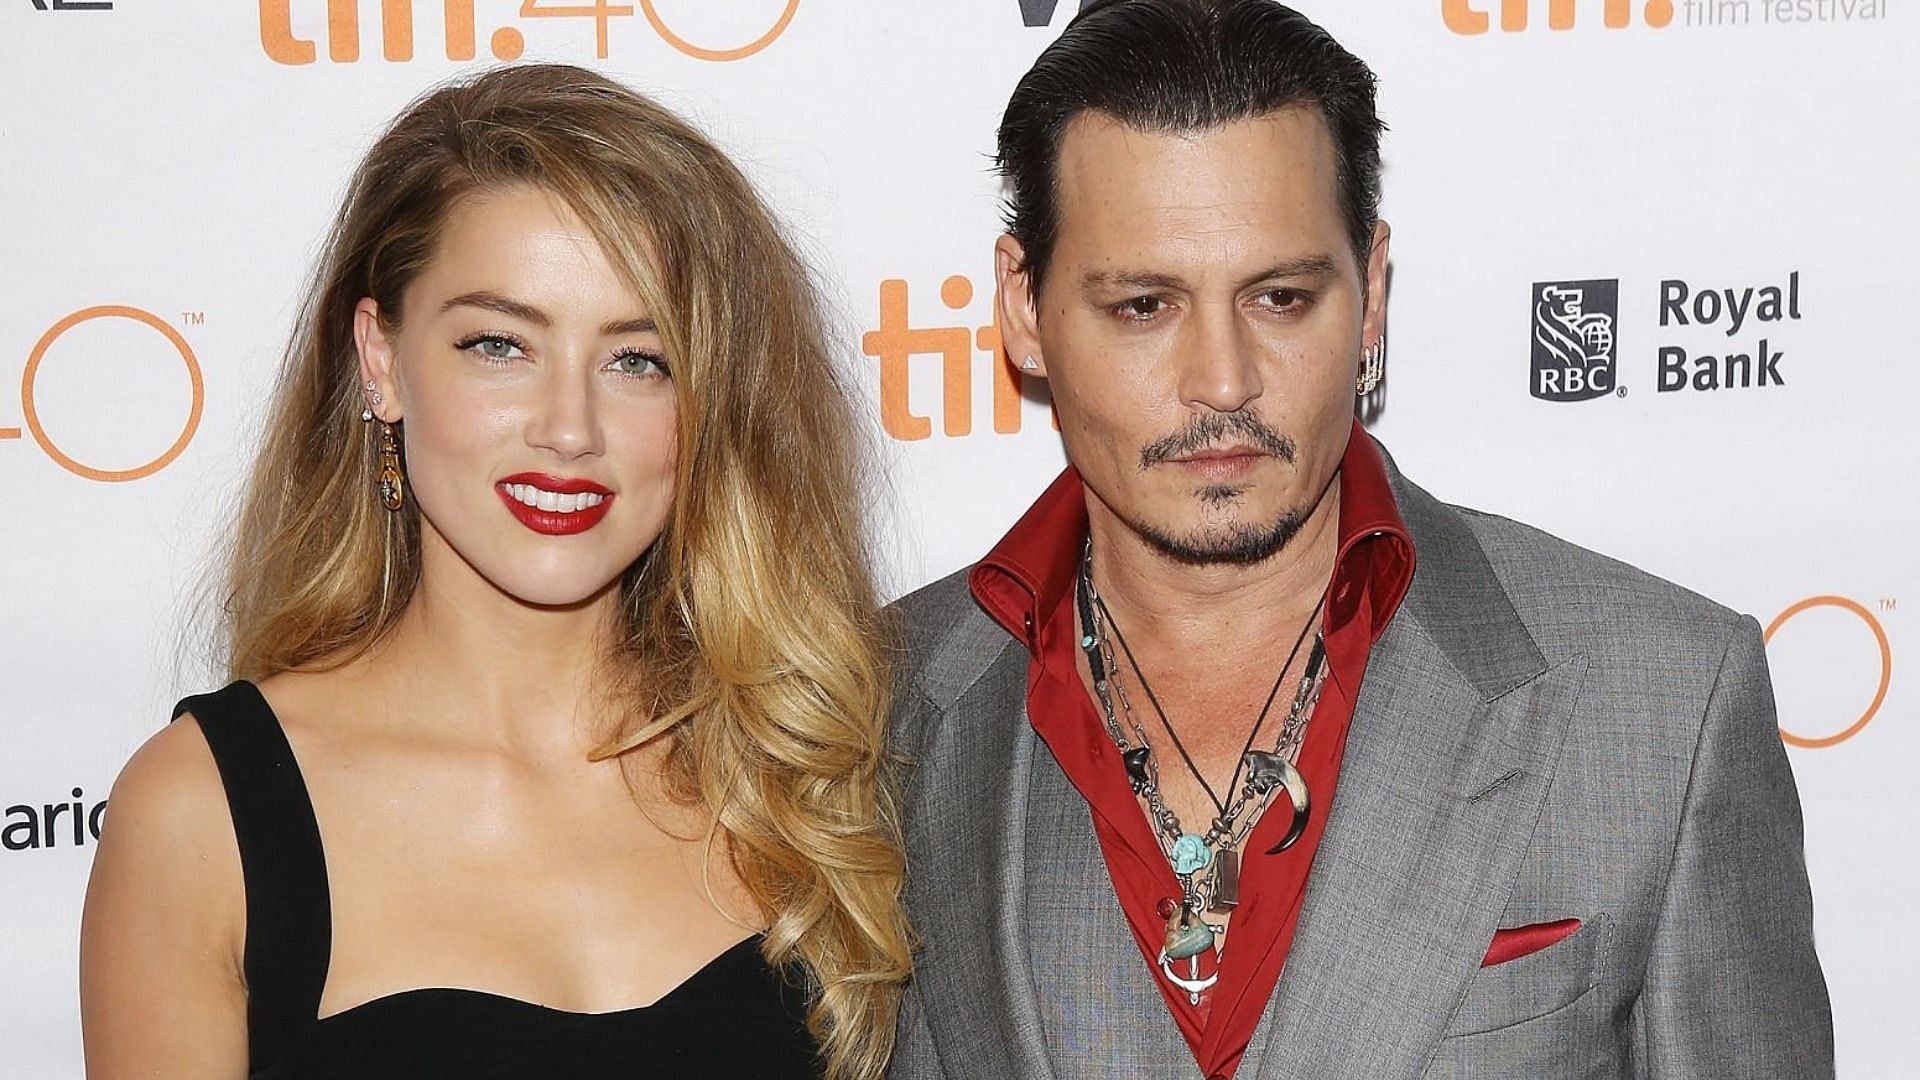 In a ruling about jury instructions, the judge said Johnny Depp&#039;s former lawyer Adam Waldman would not qualify for privilege (Image via Getty Images)